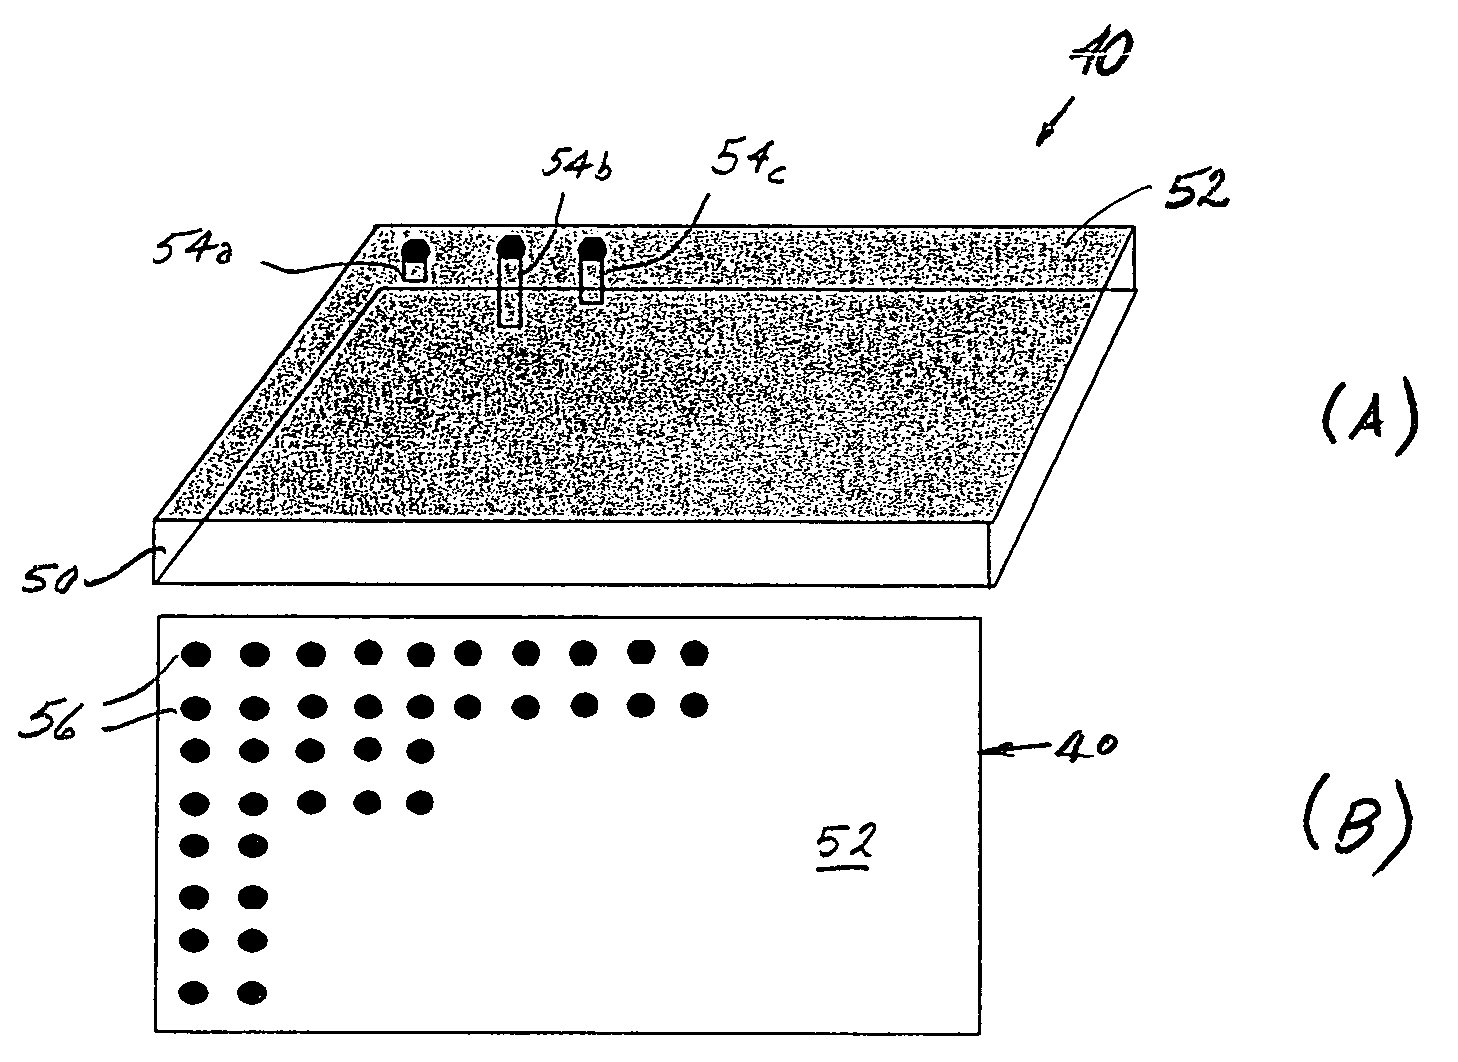 Devices and methods for storing data